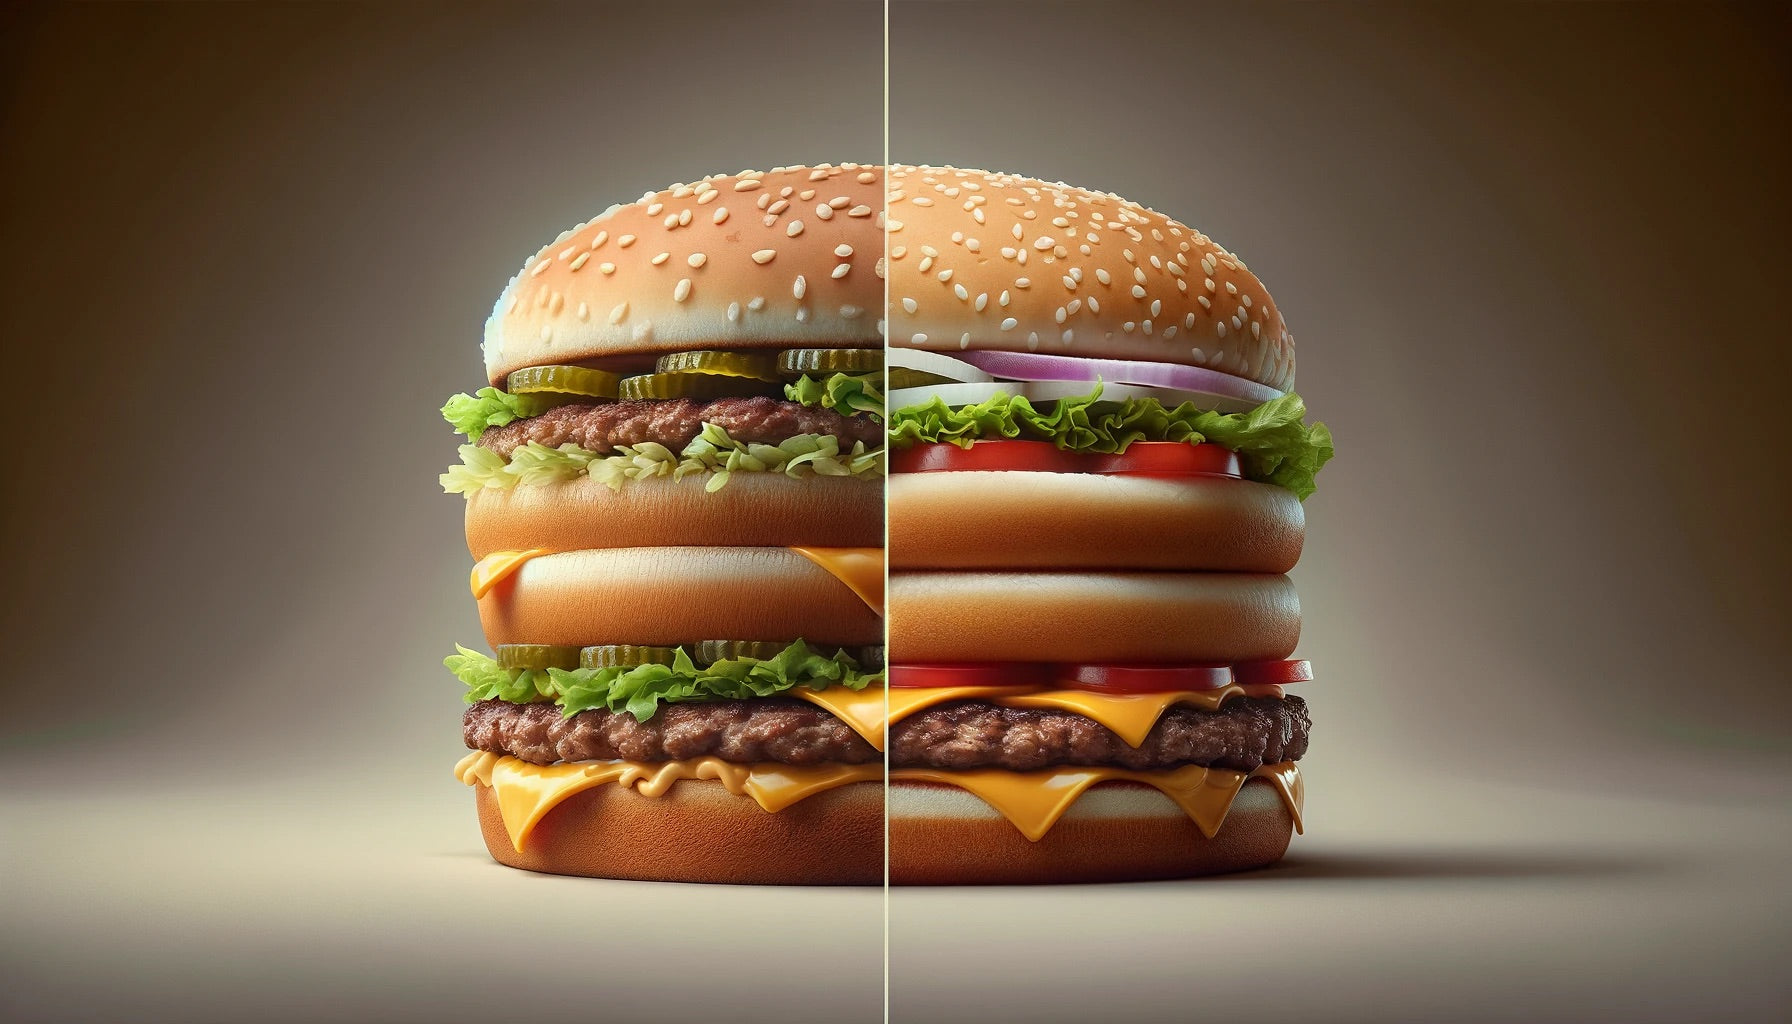 a side-by-side comparison of the iconic Big Mac and Whopper